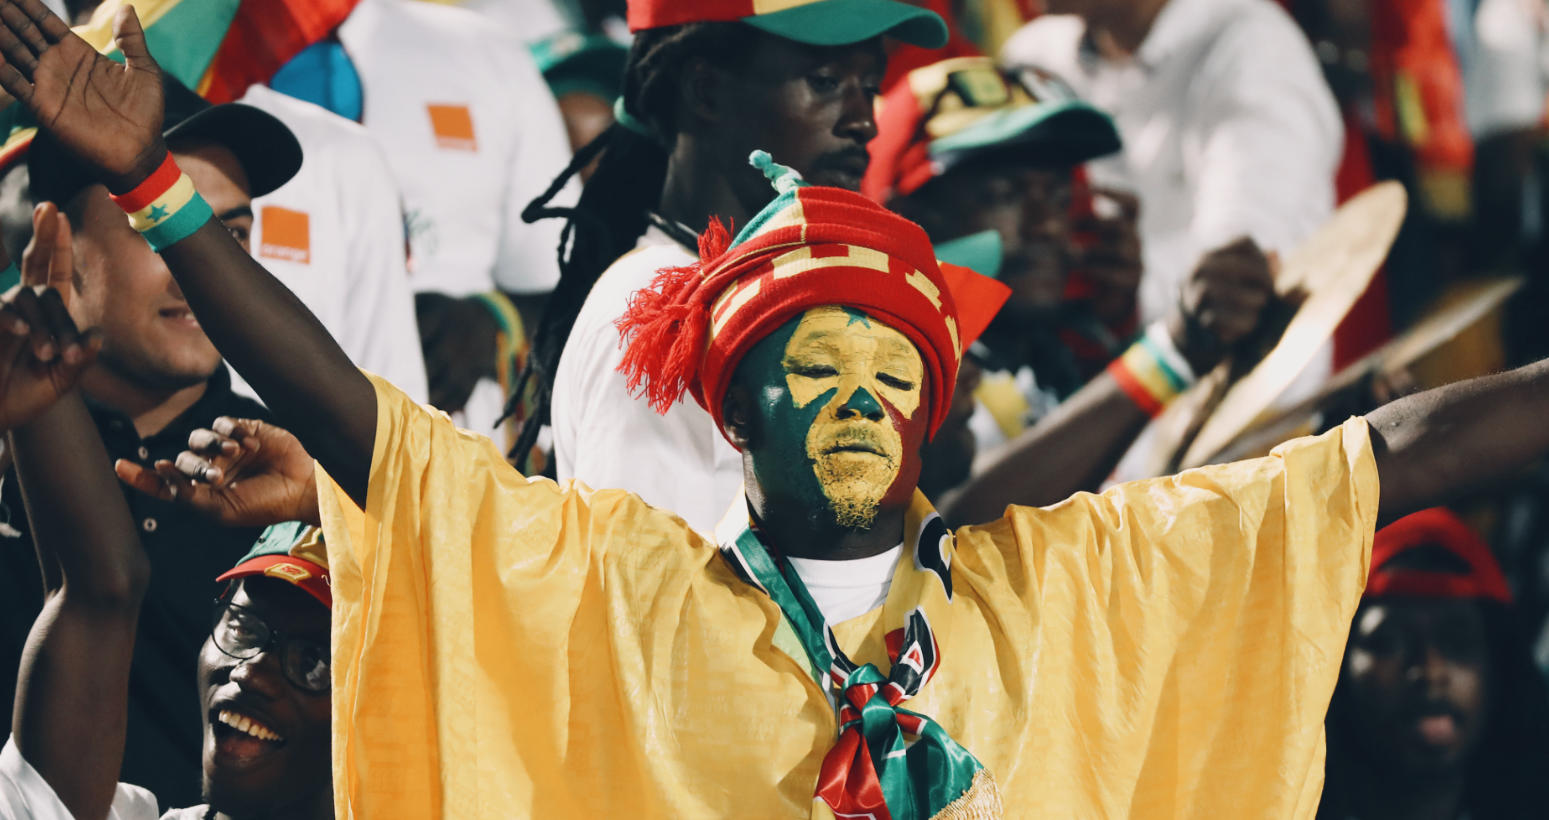 Africa Cup of Nations predictions, fixtures and results: Wednesday 2 February 2022